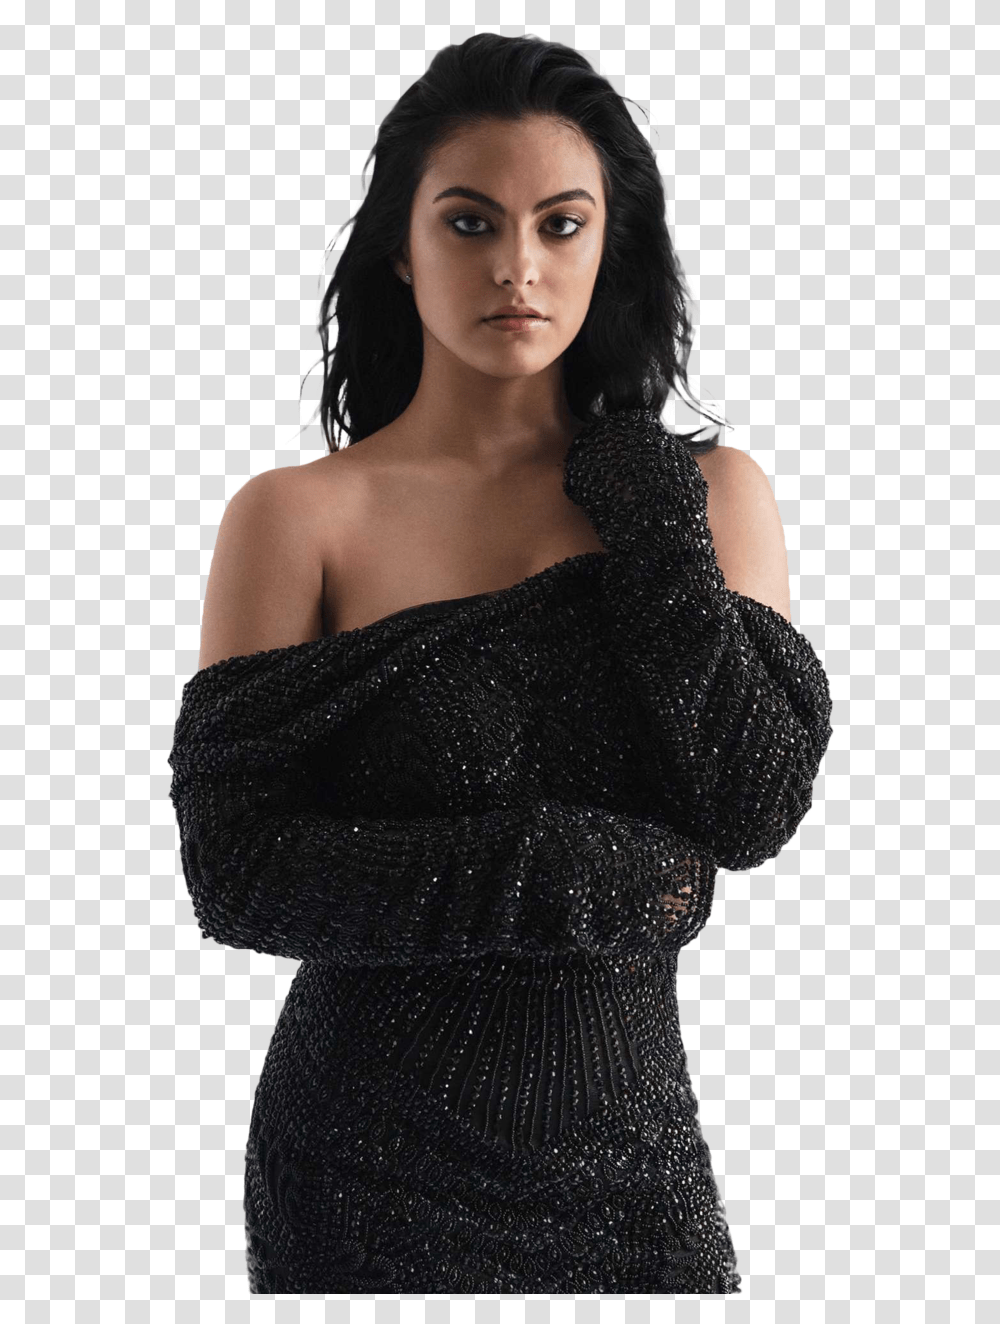 Camila Mendes In Black, Evening Dress, Robe, Gown Transparent Png